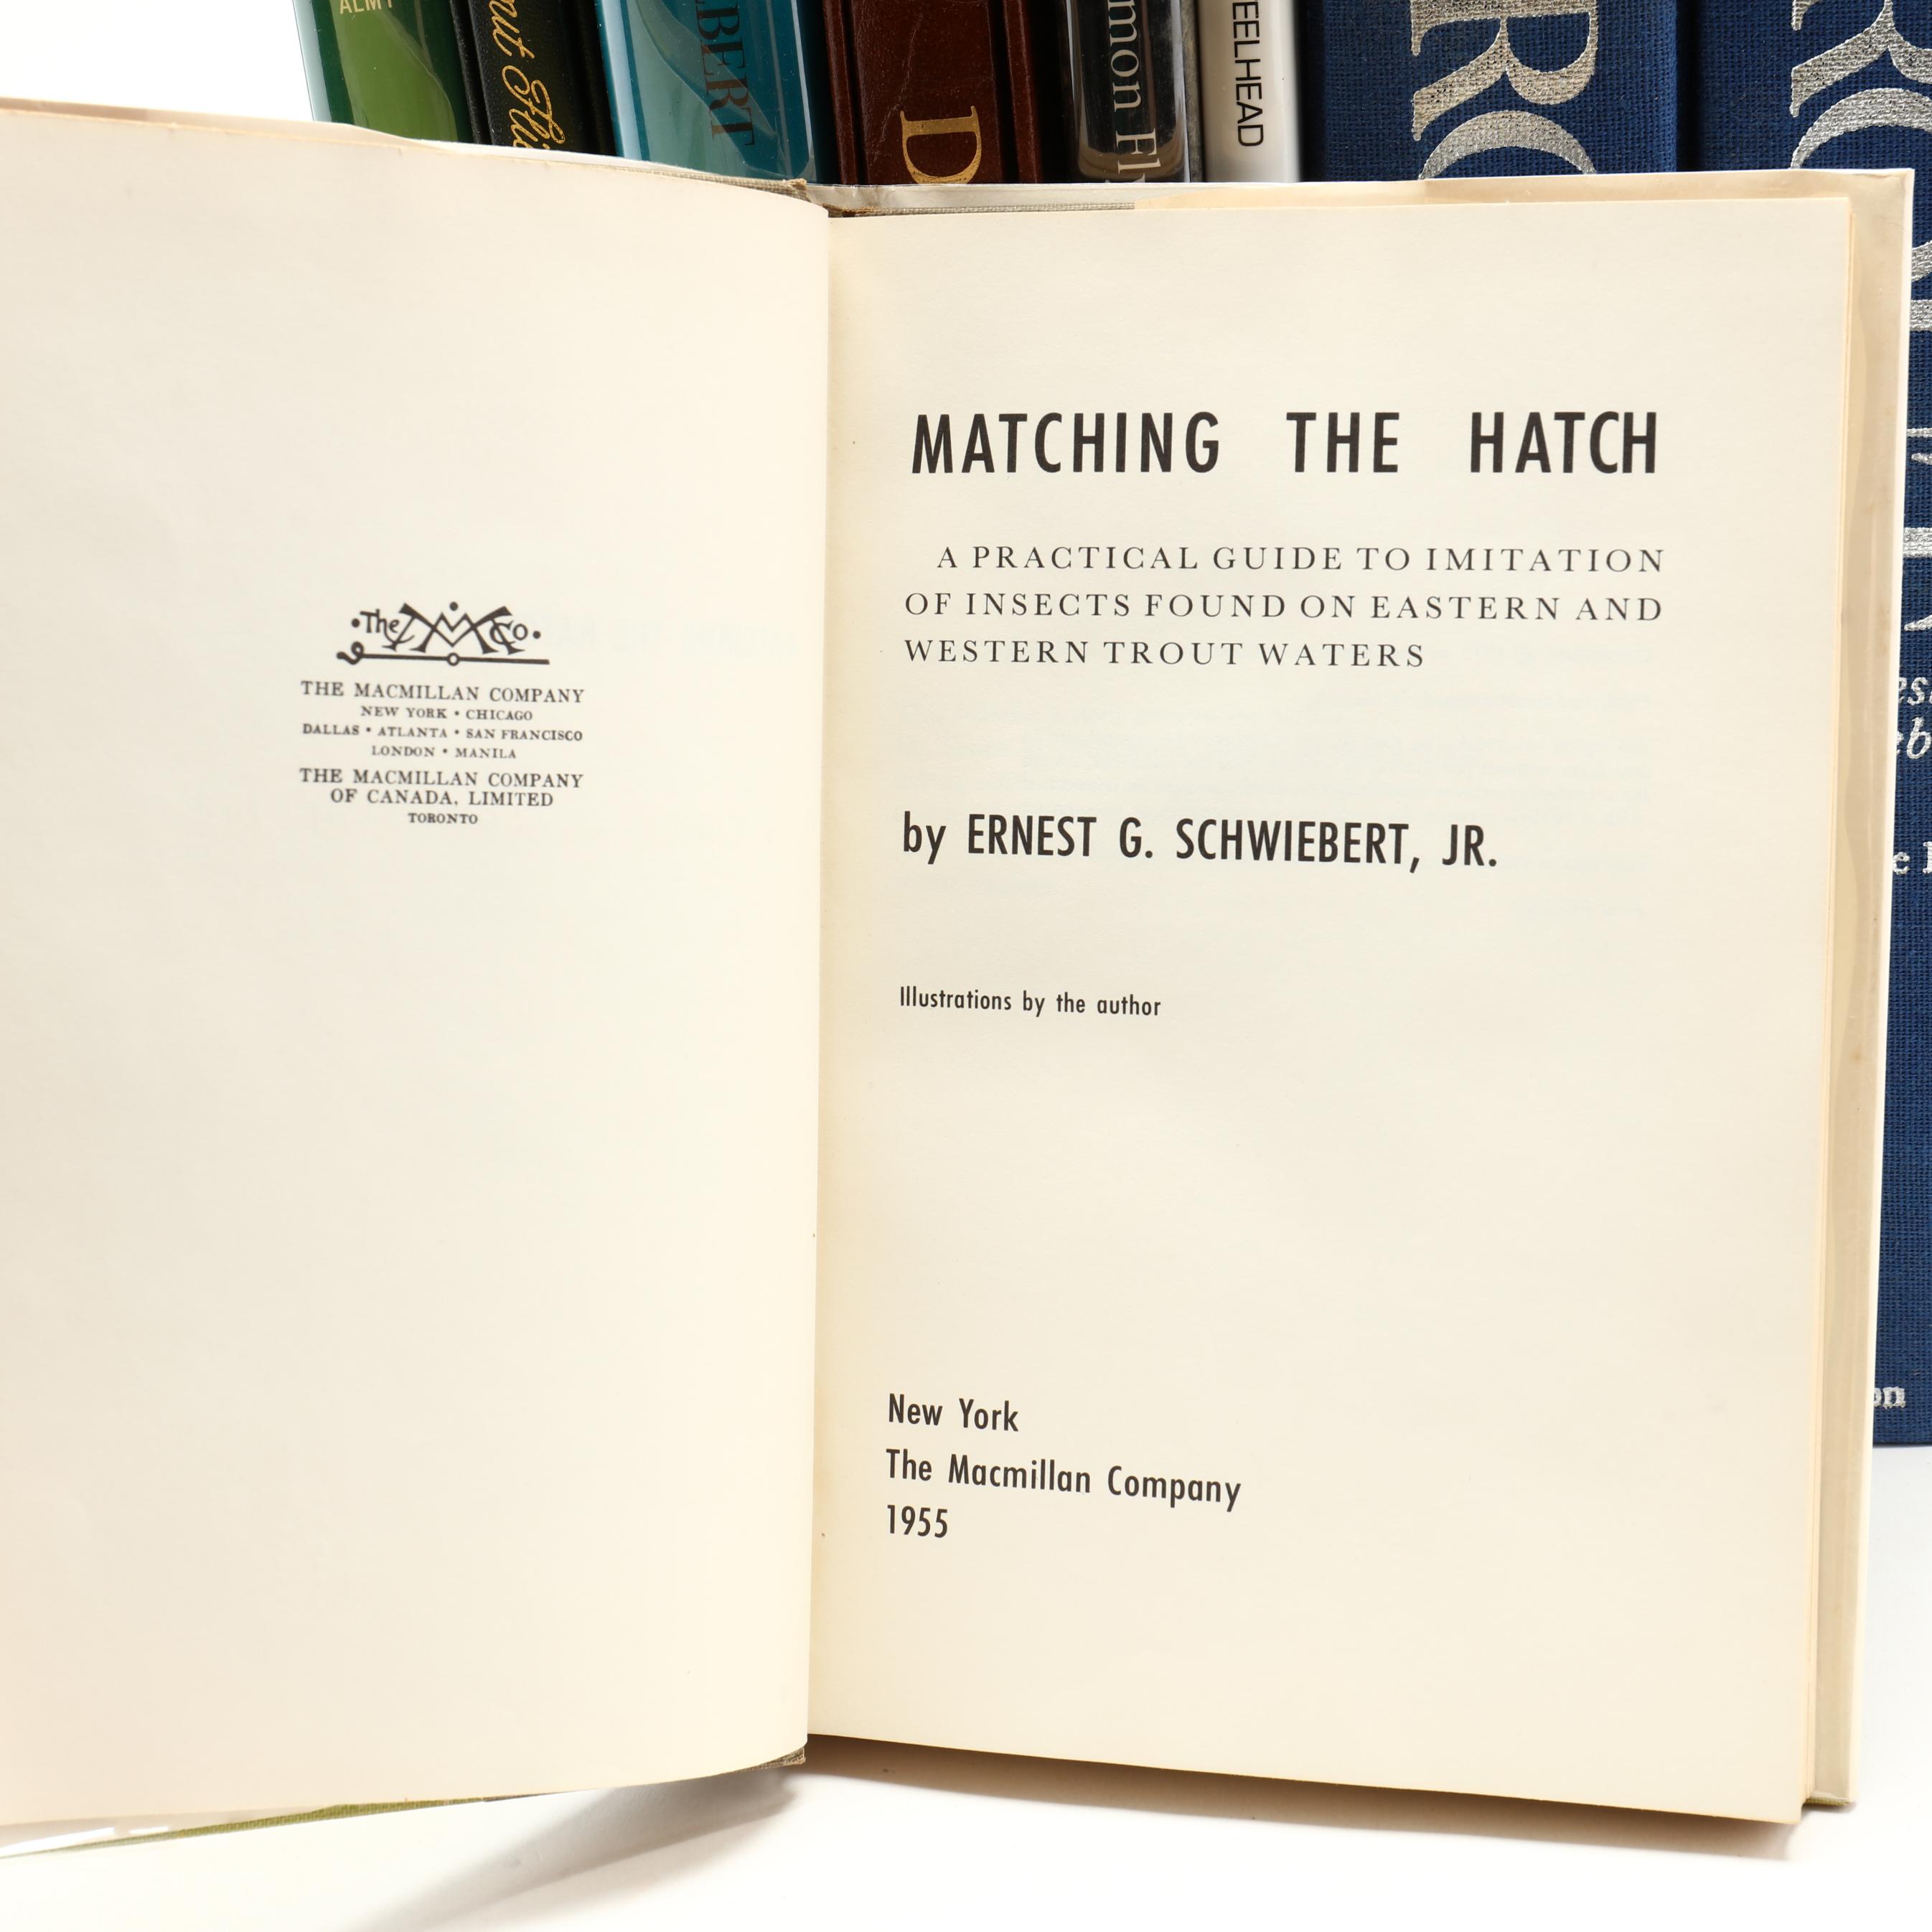 Matching the Hatch: A Practical Guide to Imitation of Insects